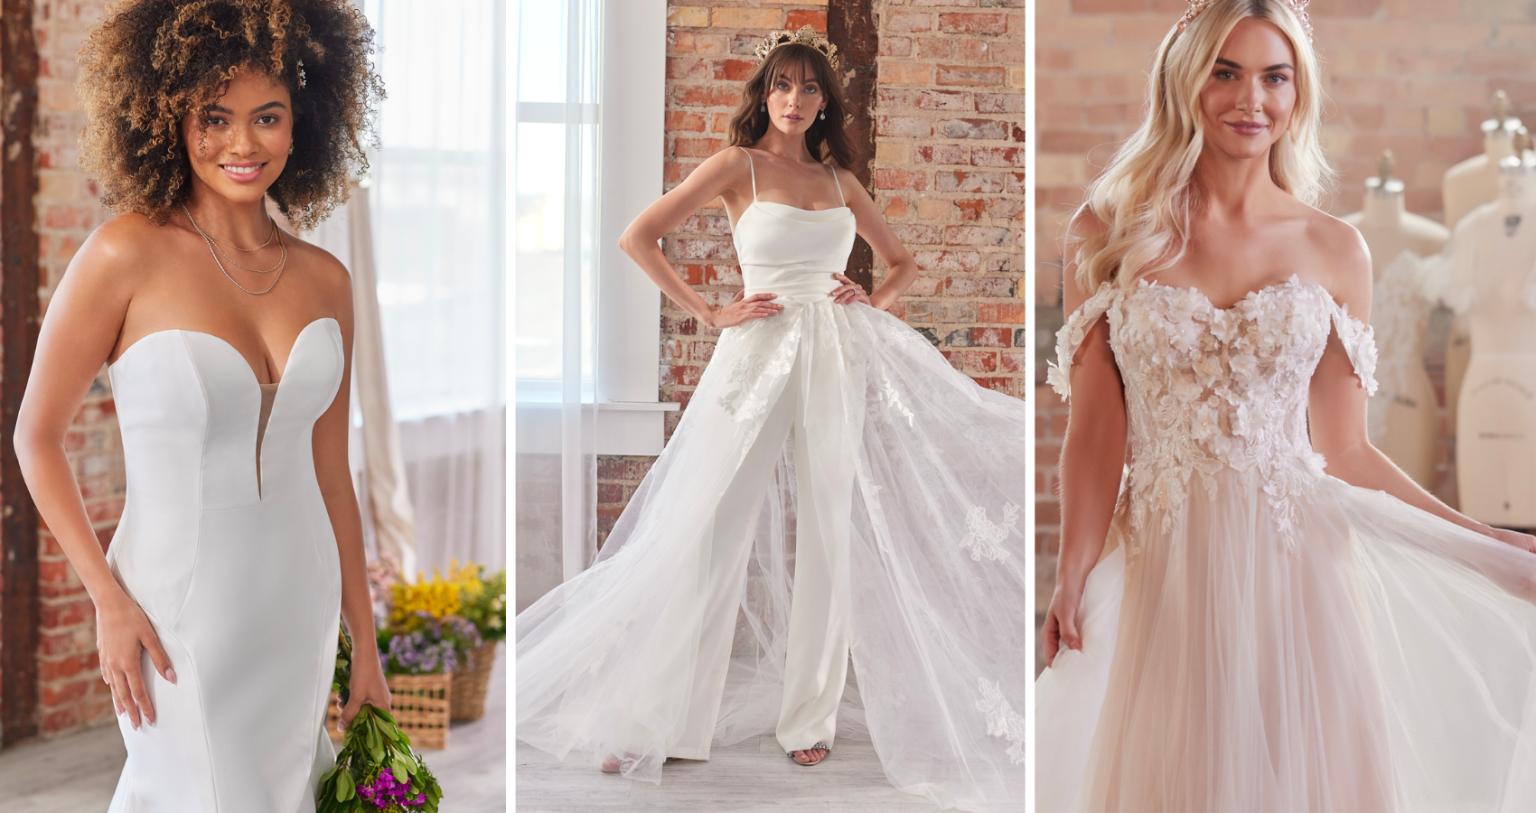 10 Unique Wedding Dresses For A New Year And New You